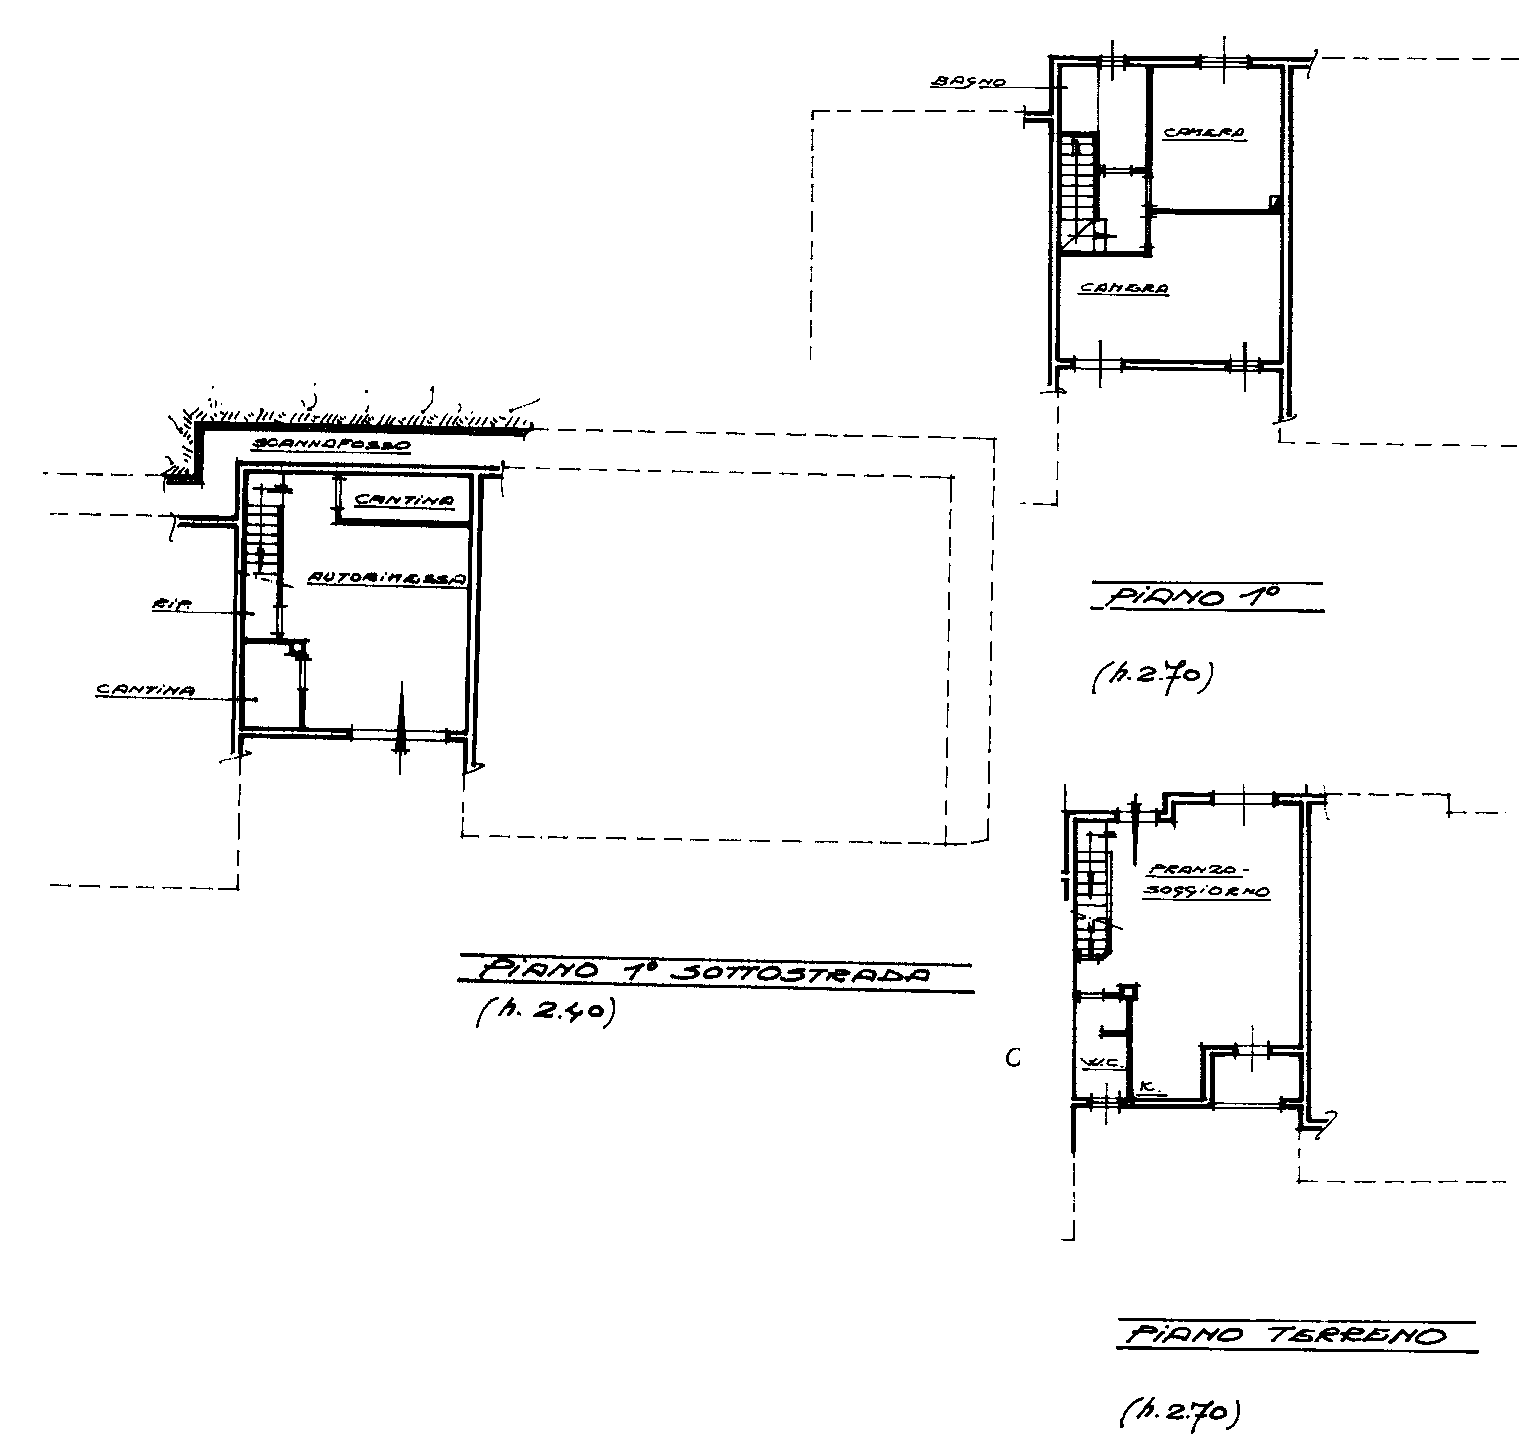 Townhouses for sale, ref. 890 (Plan 1/2)